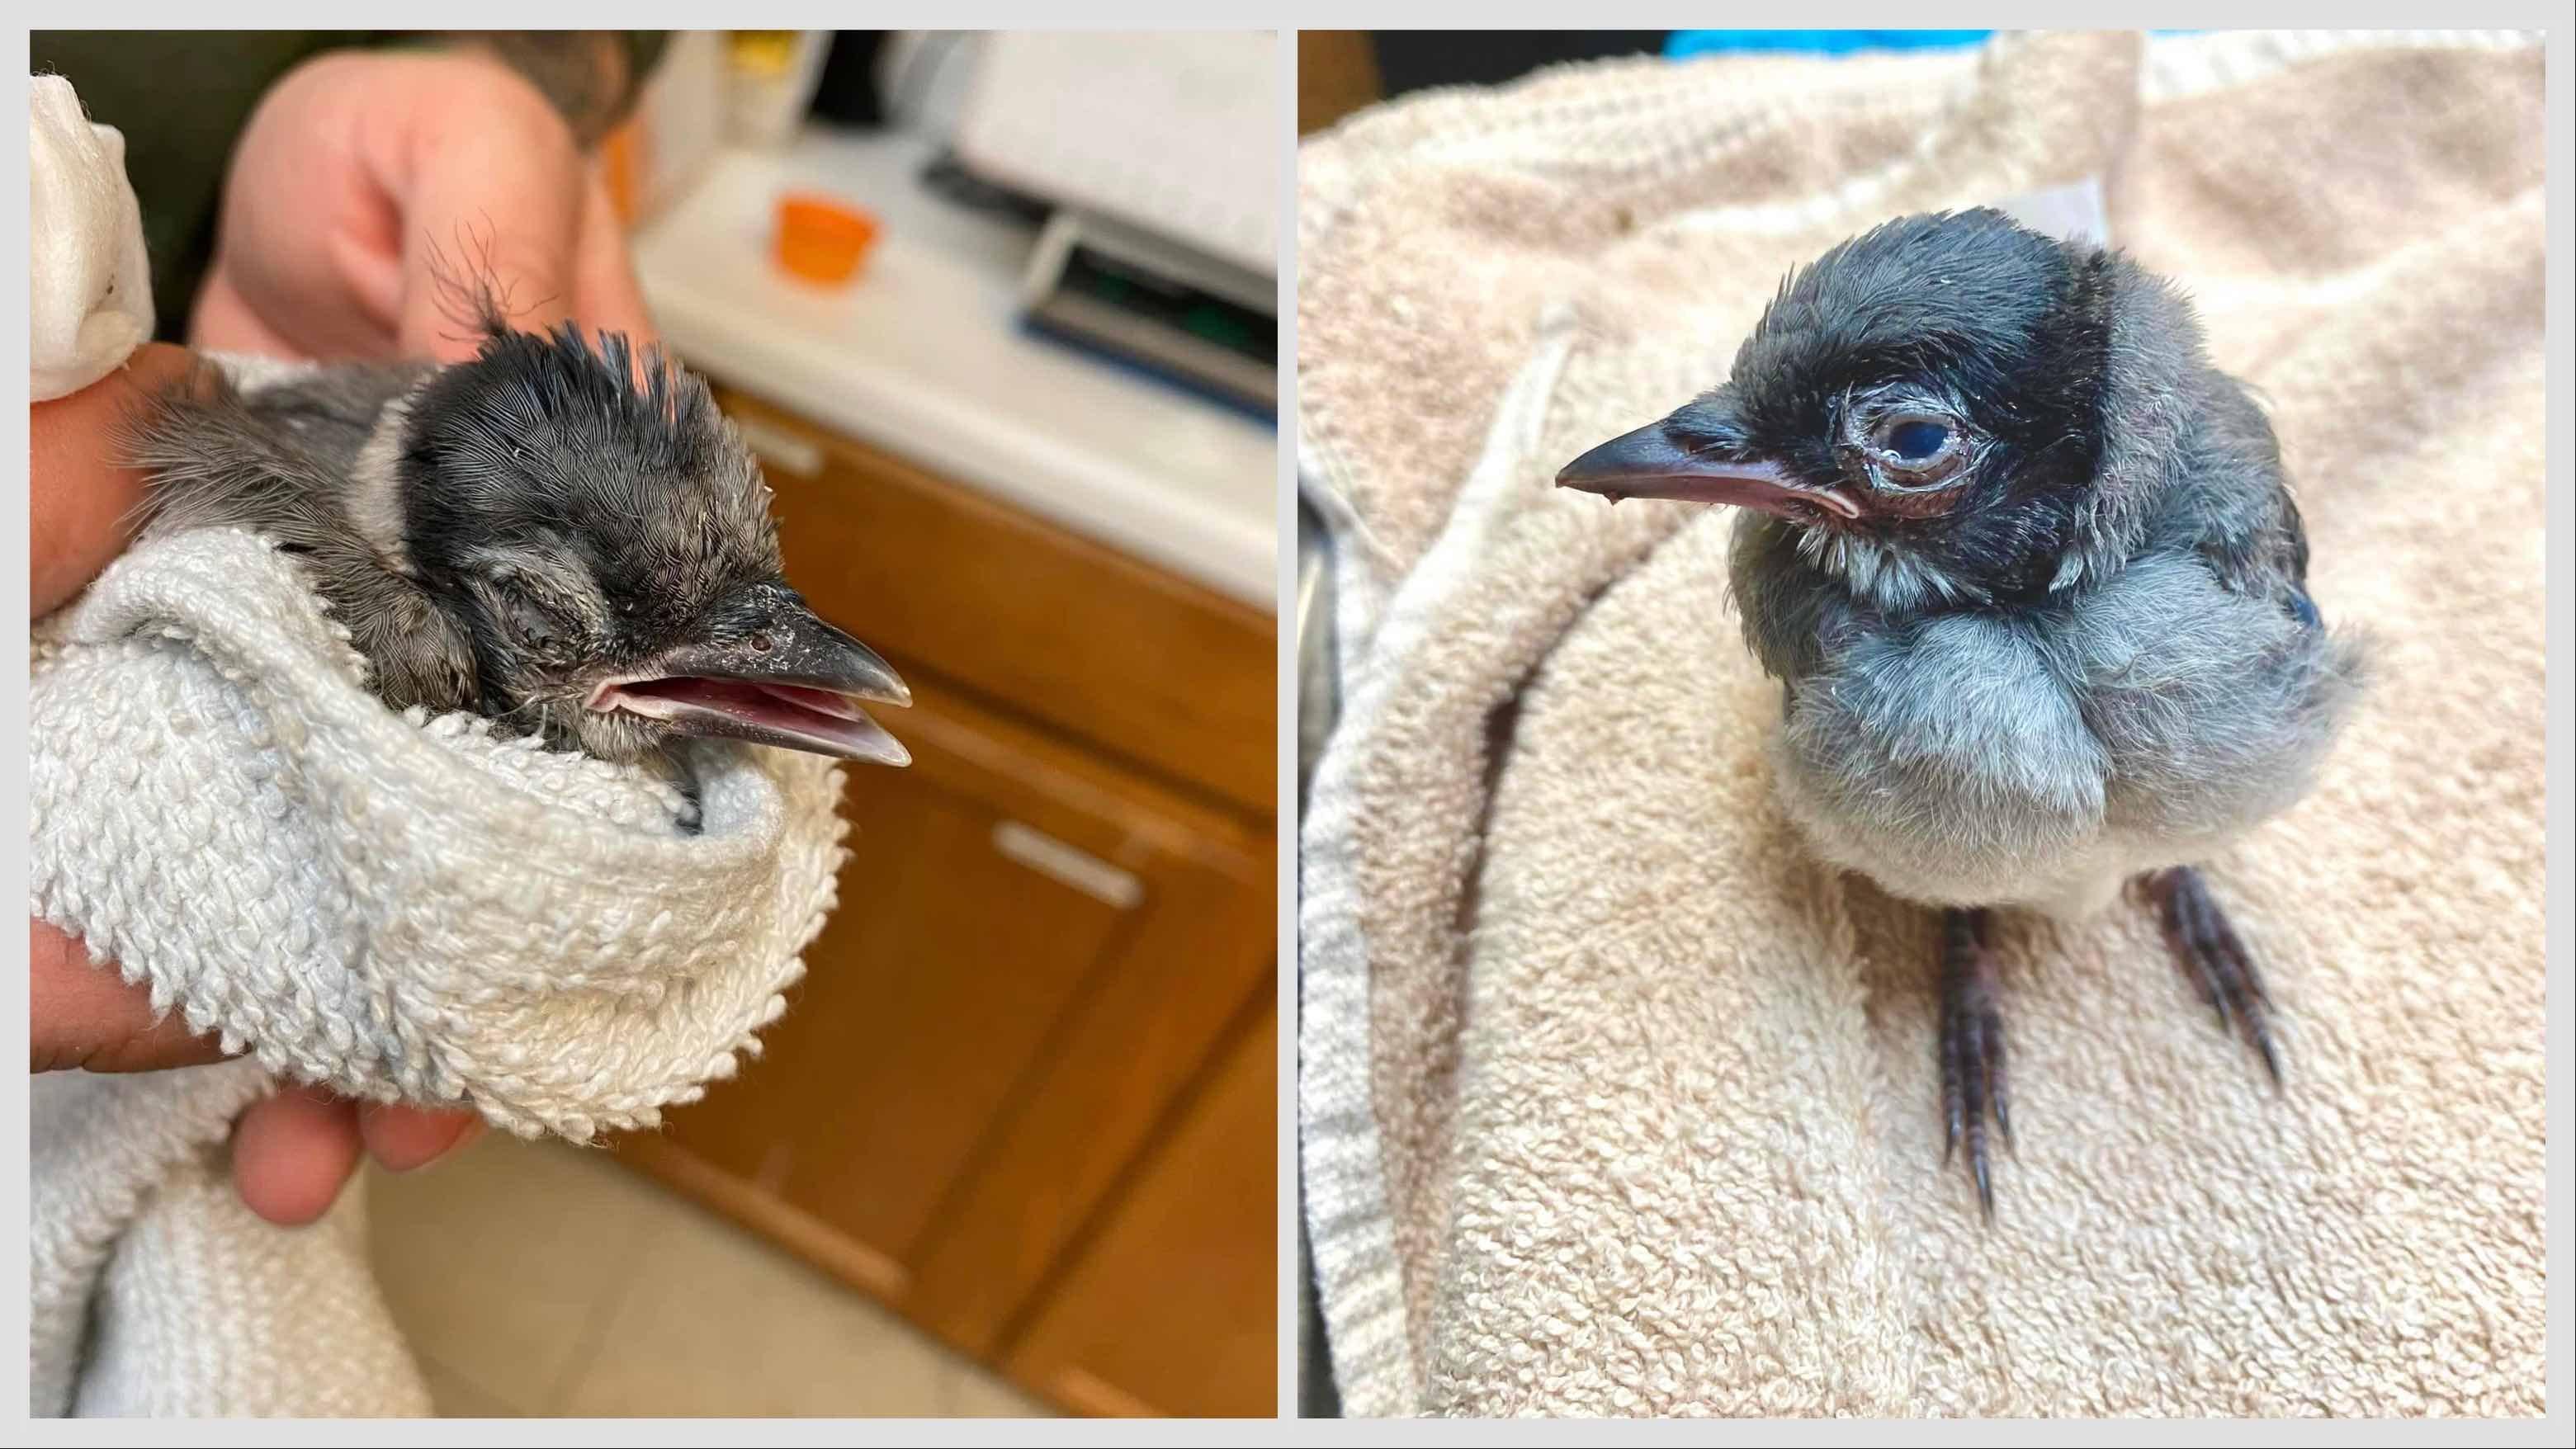 Birds admitted to Willowbrook Wildlife Center, showing signs of suspected vitamin A deficiency caused by eating too many cicadas. (Courtesy of Willowbrook Wildlife Center)